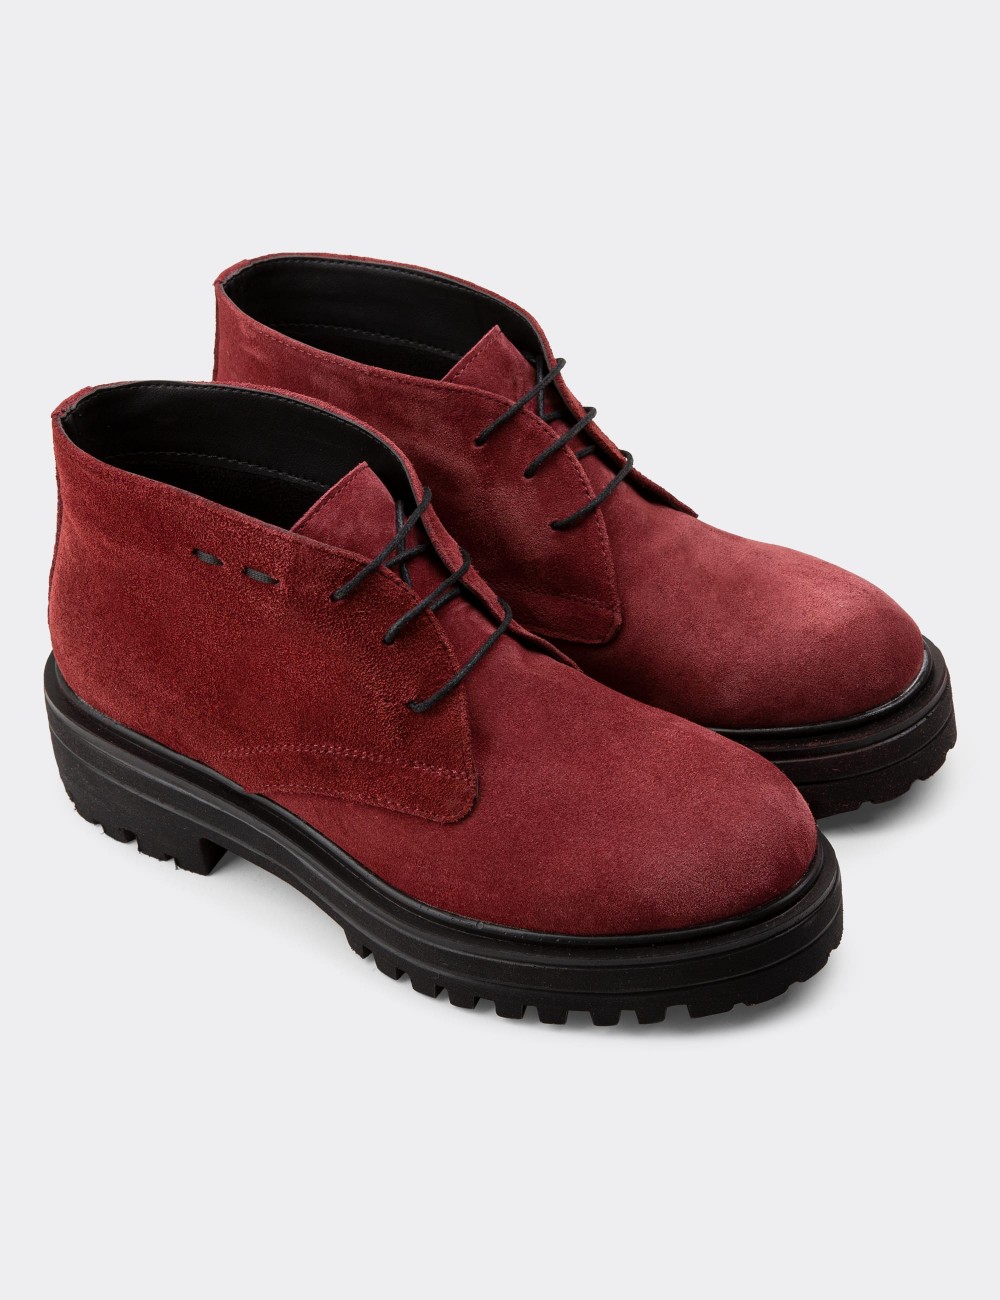 Red Suede Leather Boots - 01847ZKRME02